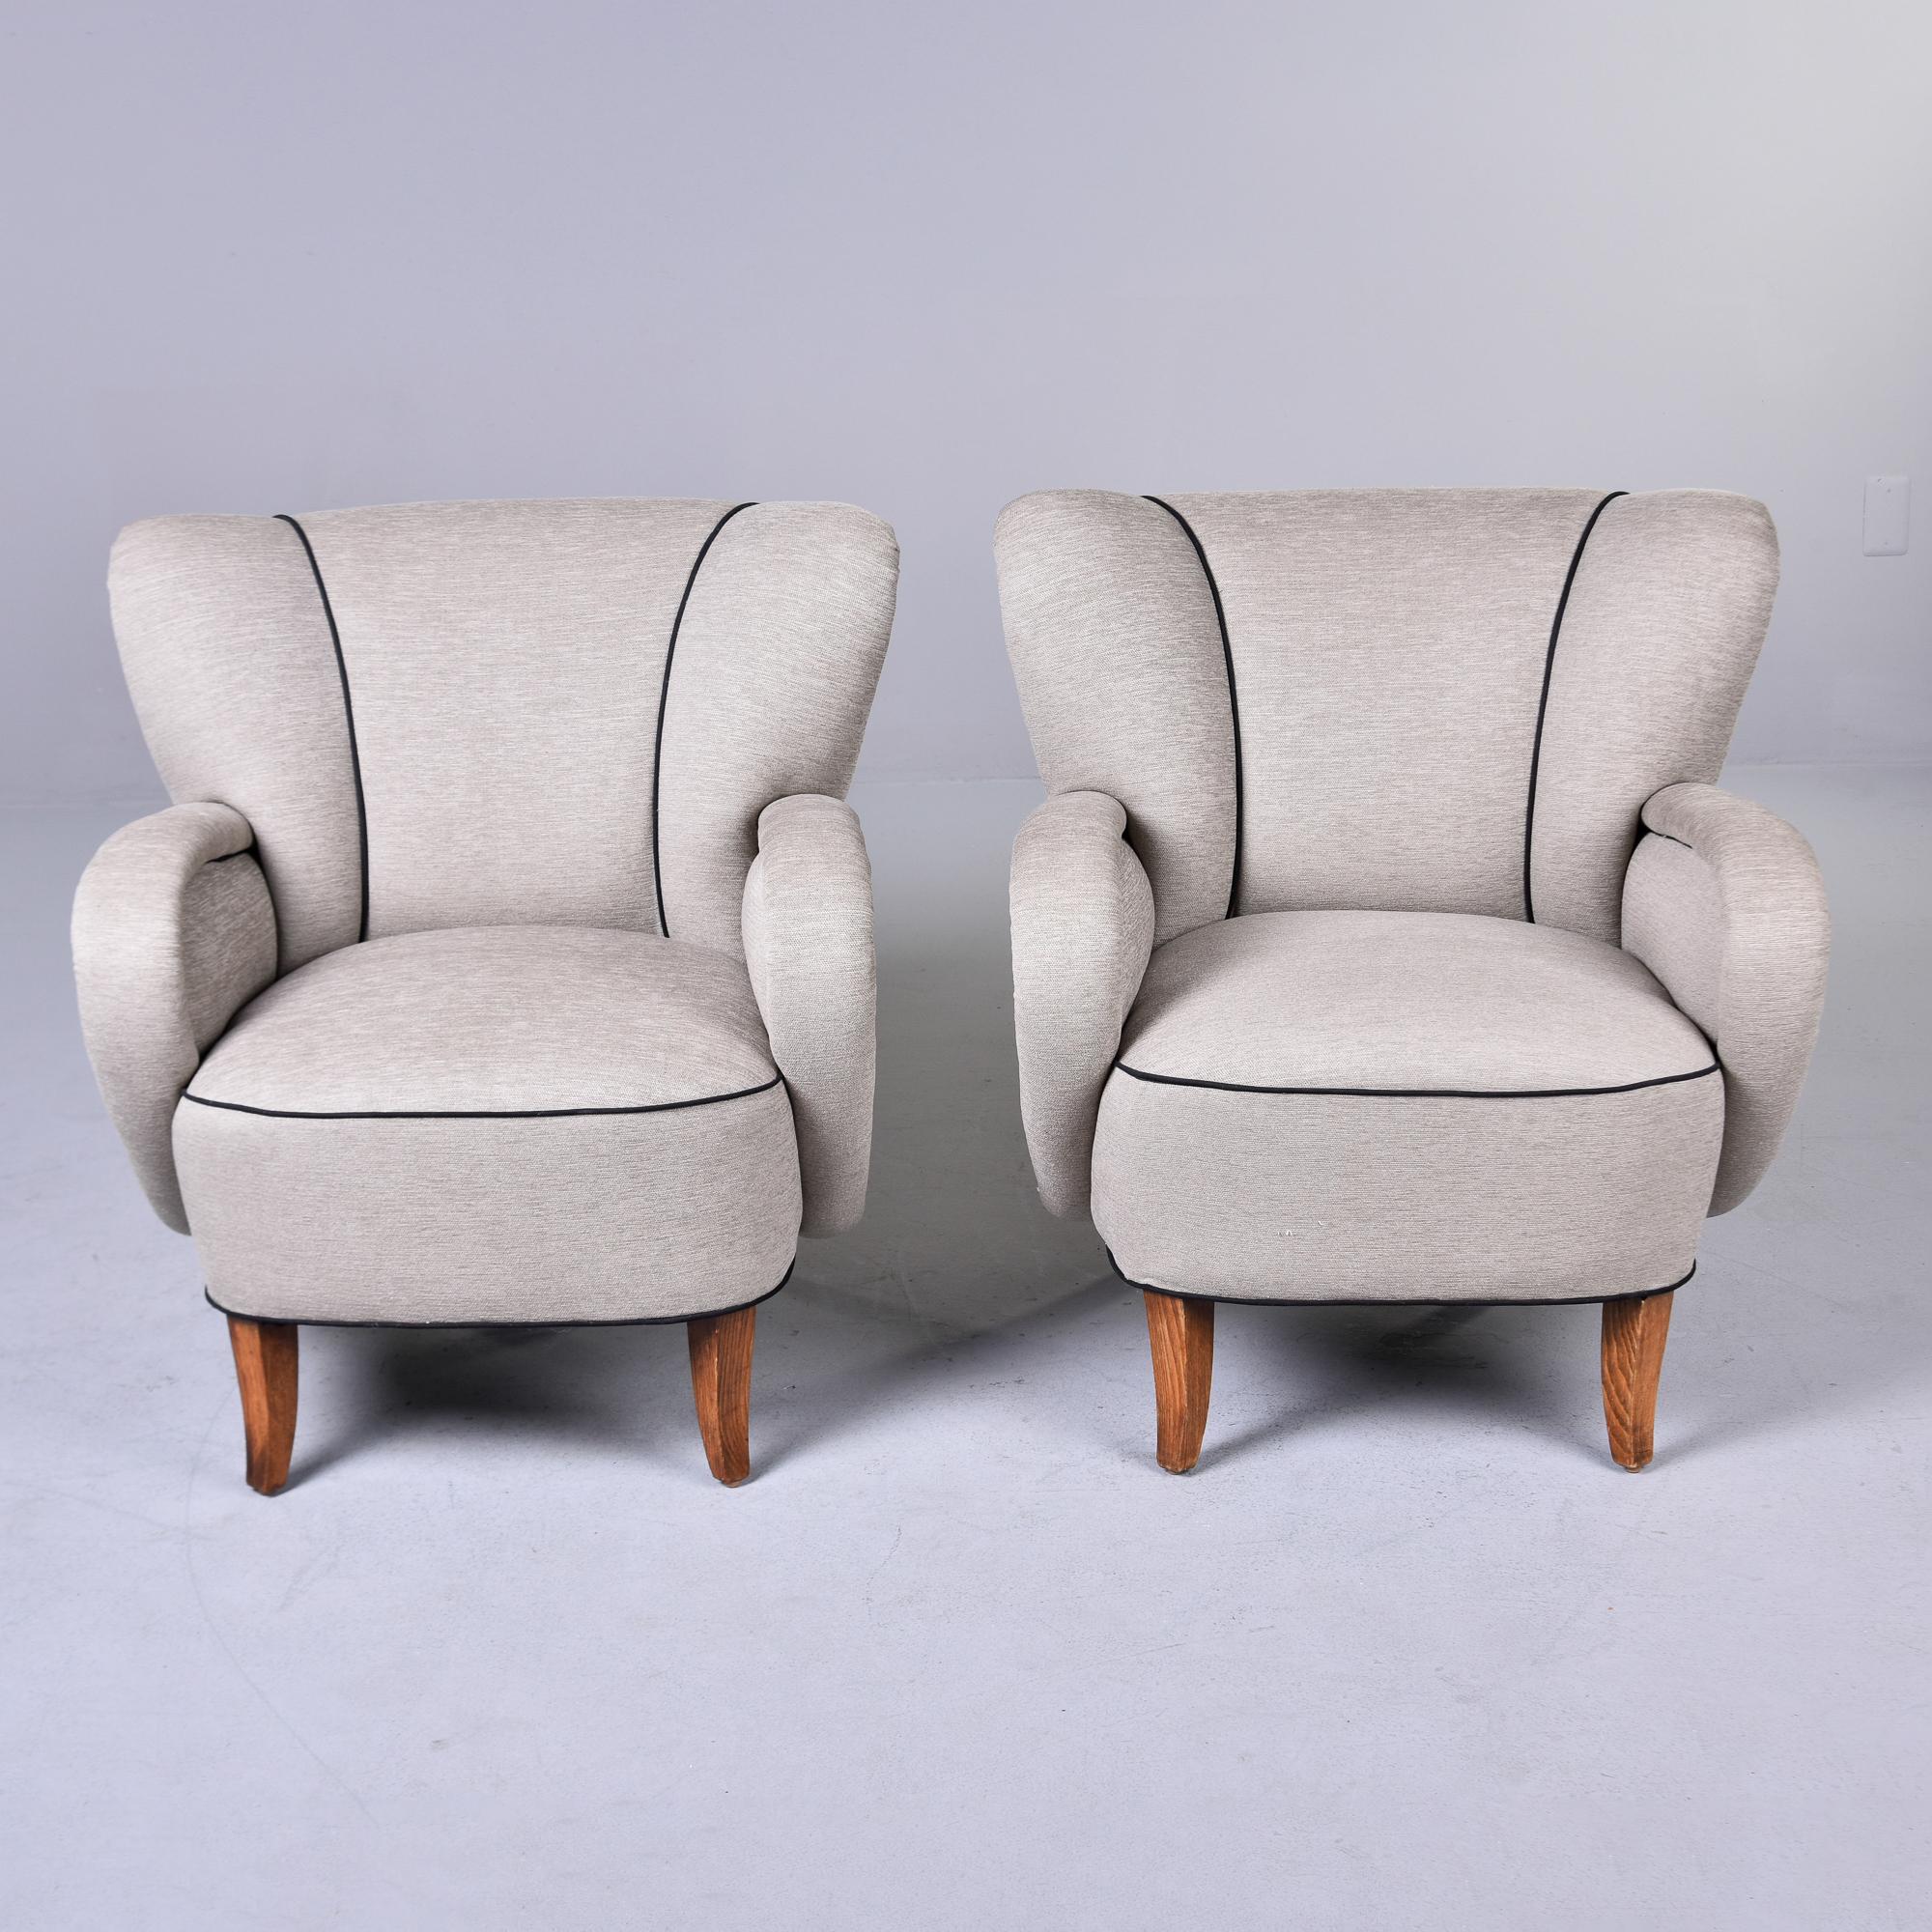 Found in Italy, this pair of Italian arm chairs date from the late 1940s / early 1950s. These chairs have been newly upholstered in a greige fabric with contrasting black welting that highlights the curves. Unknown maker. Sold and priced as a pair.